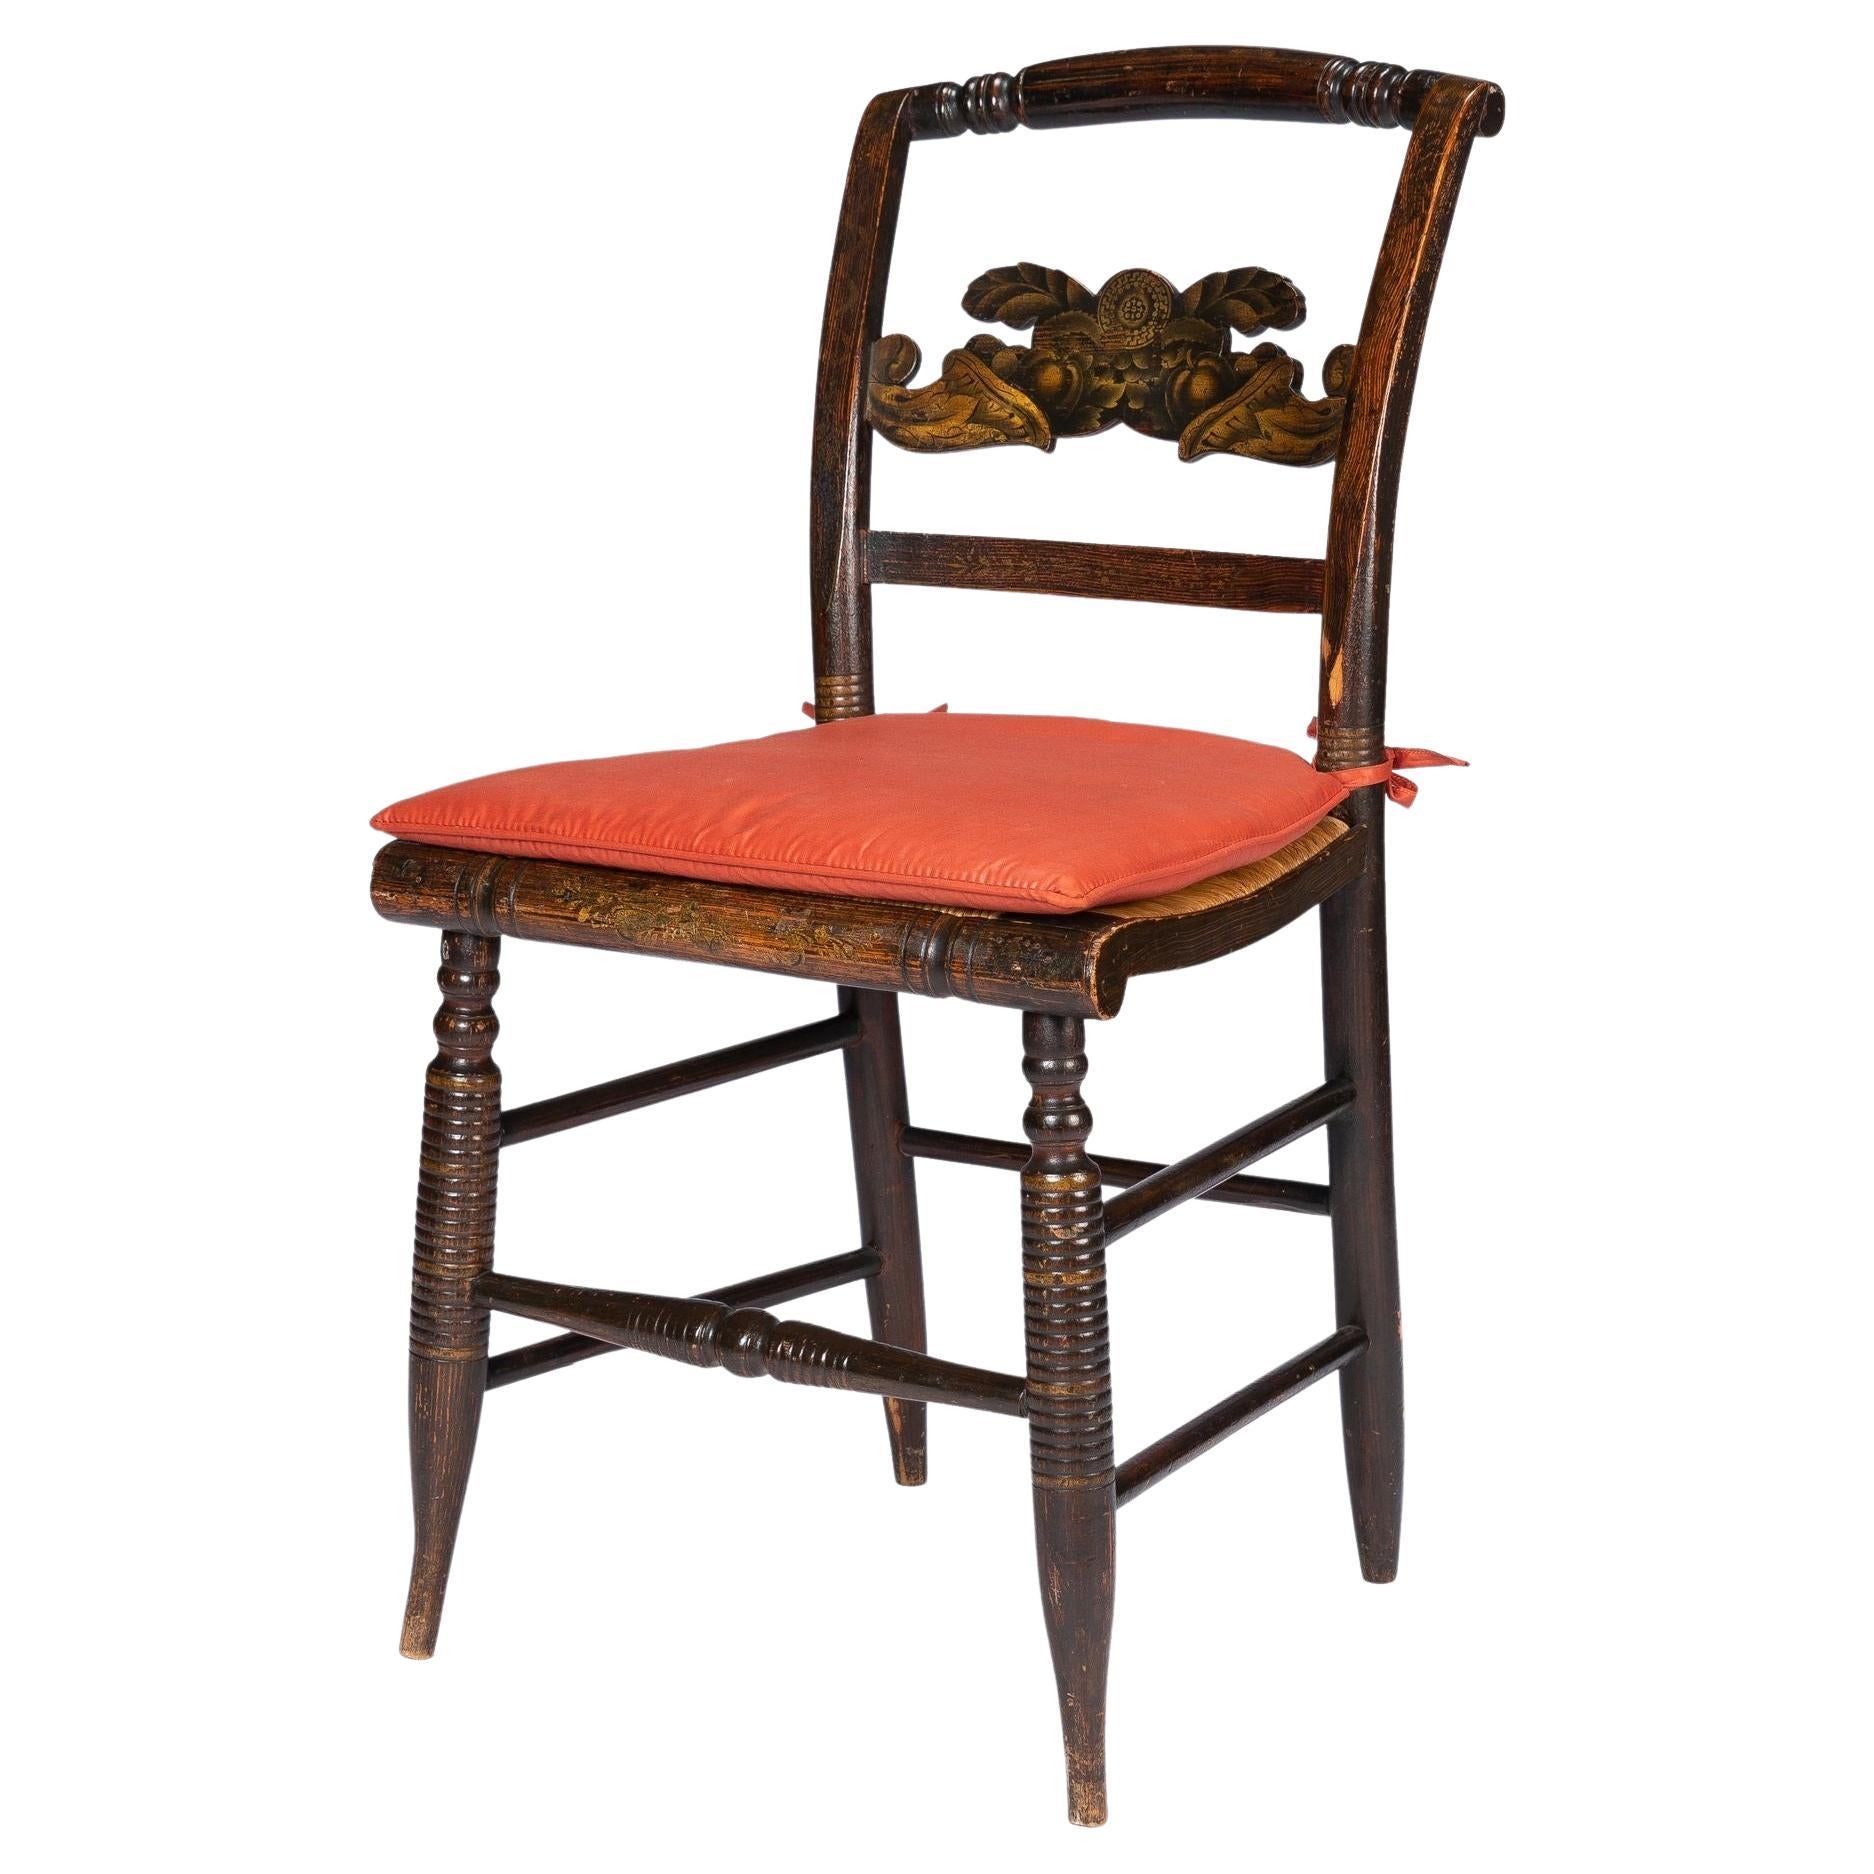 Connecticut Valley rush seat painted Hitchcock side chair, 1830